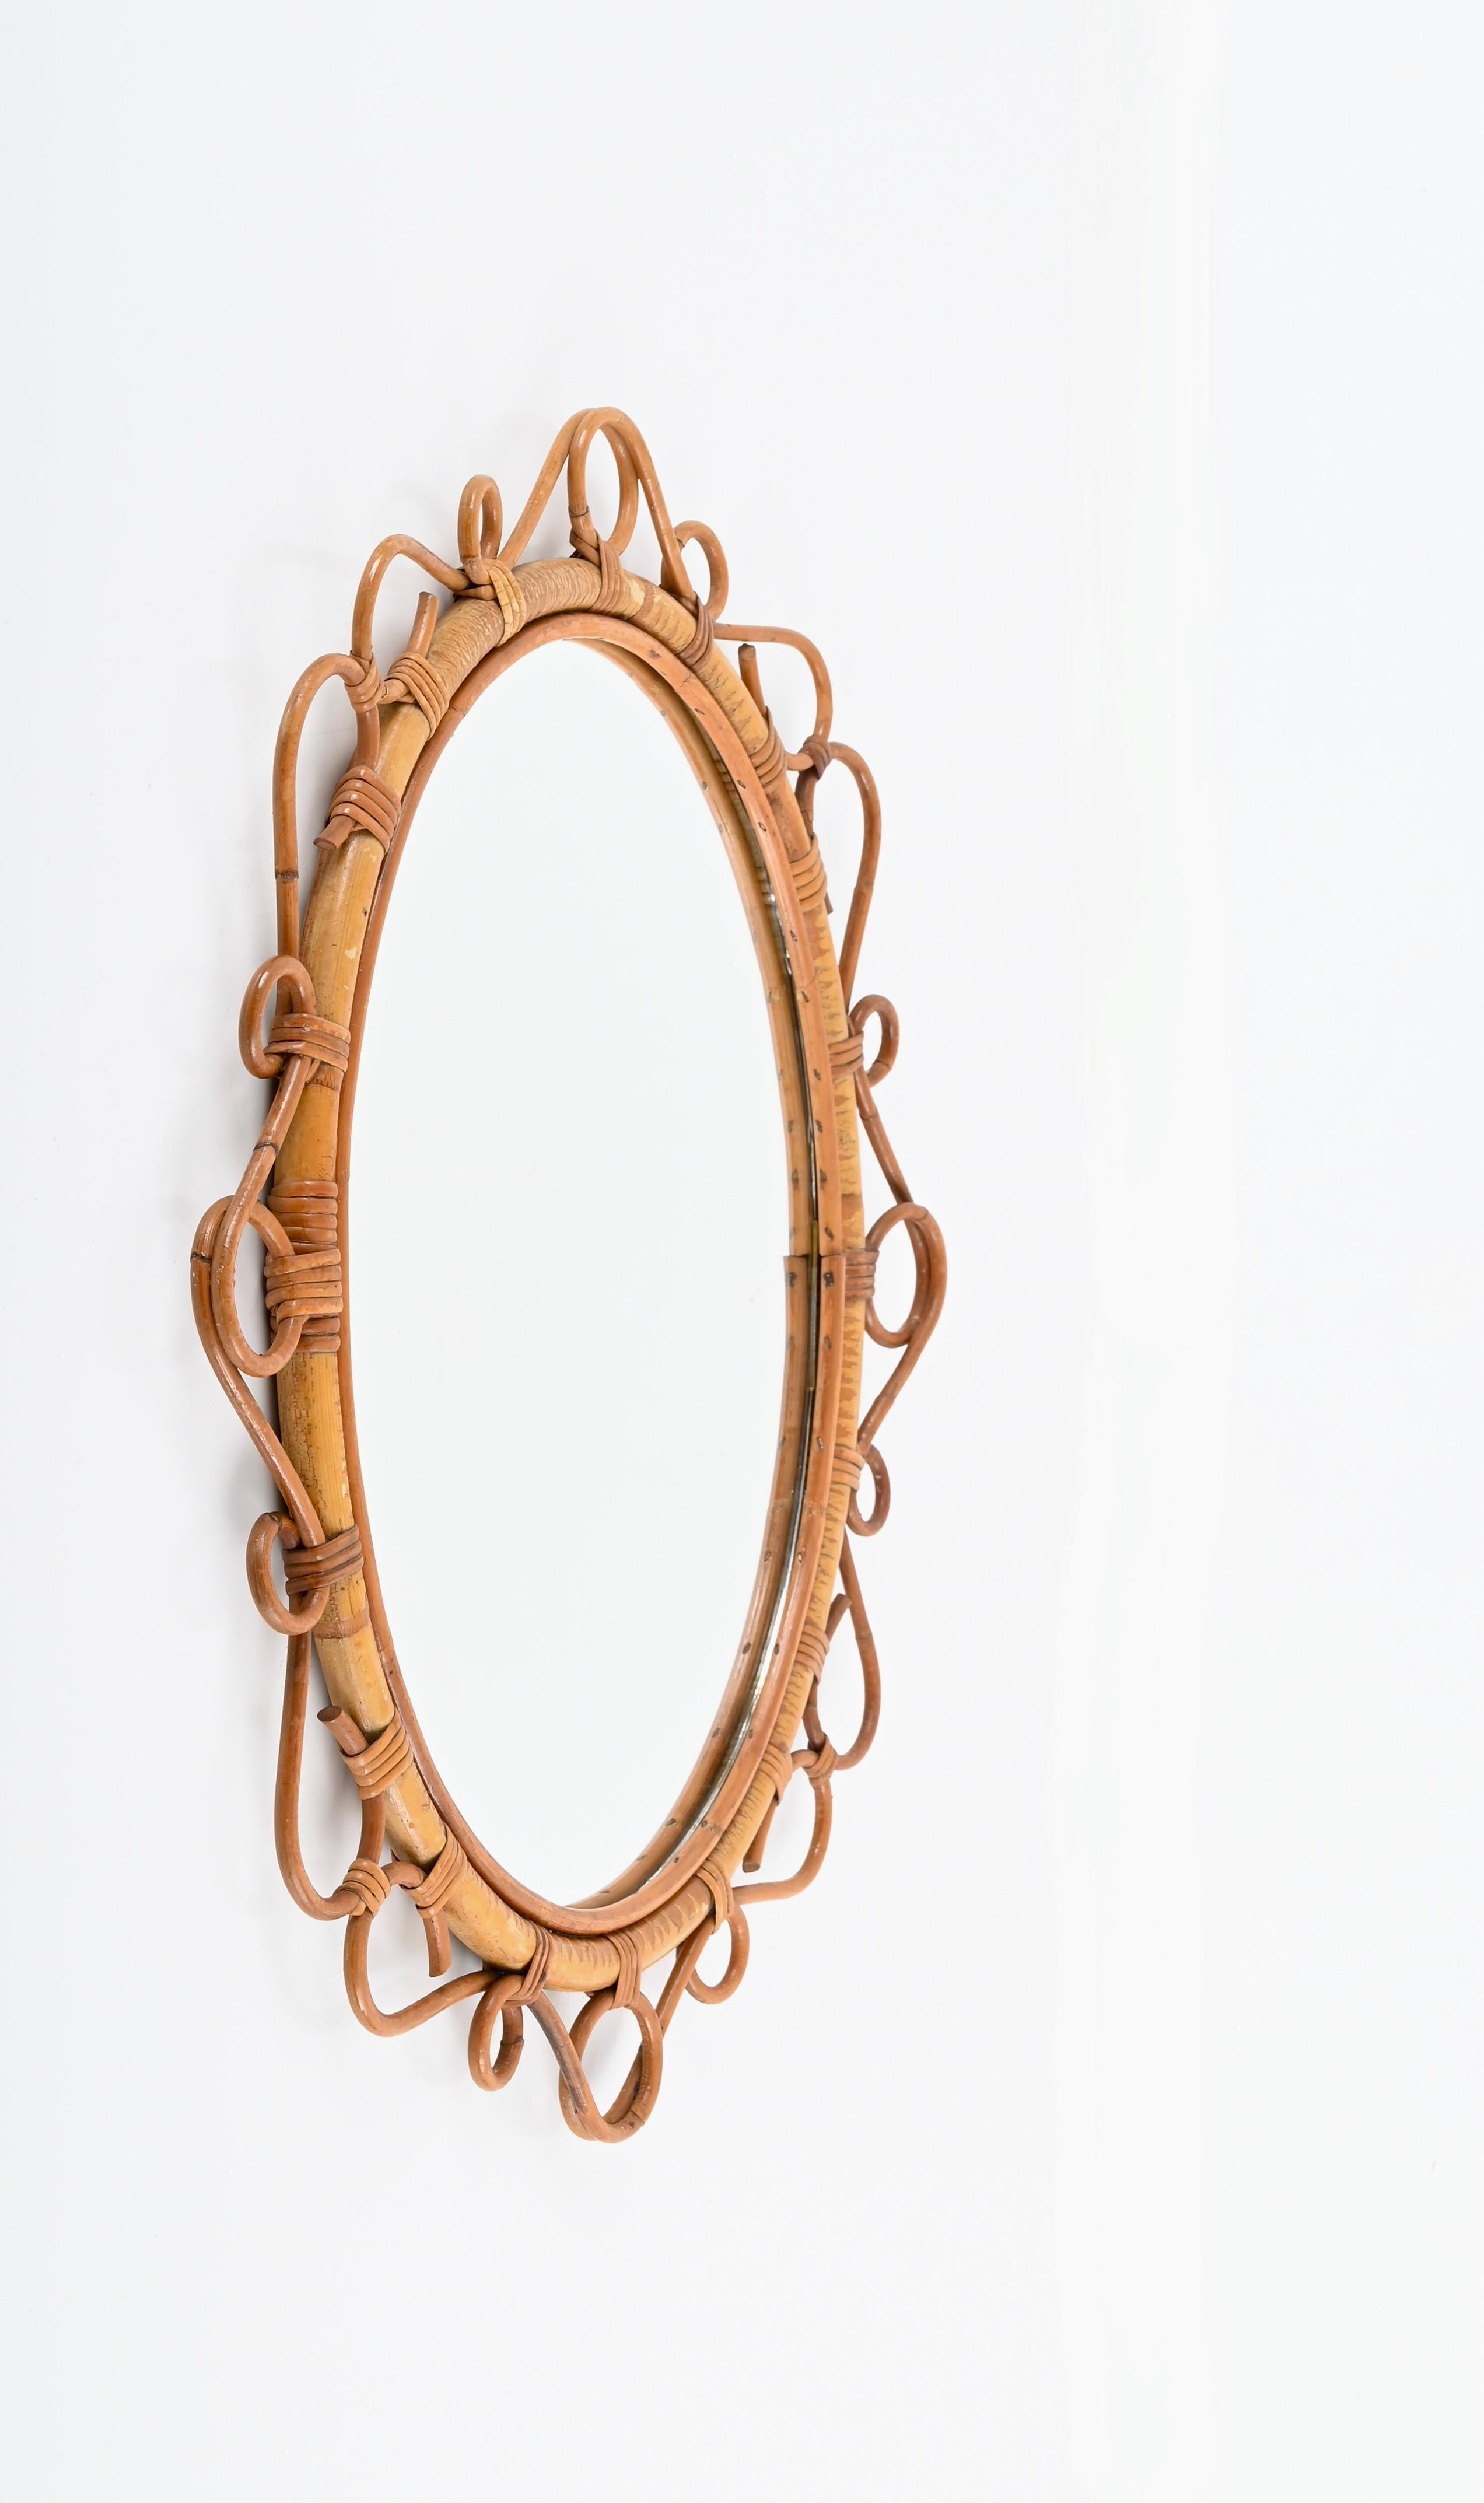 Late 20th Century French Riviera Oval Mirror in Rattan, Bamboo and Wicker, Italy 1970s